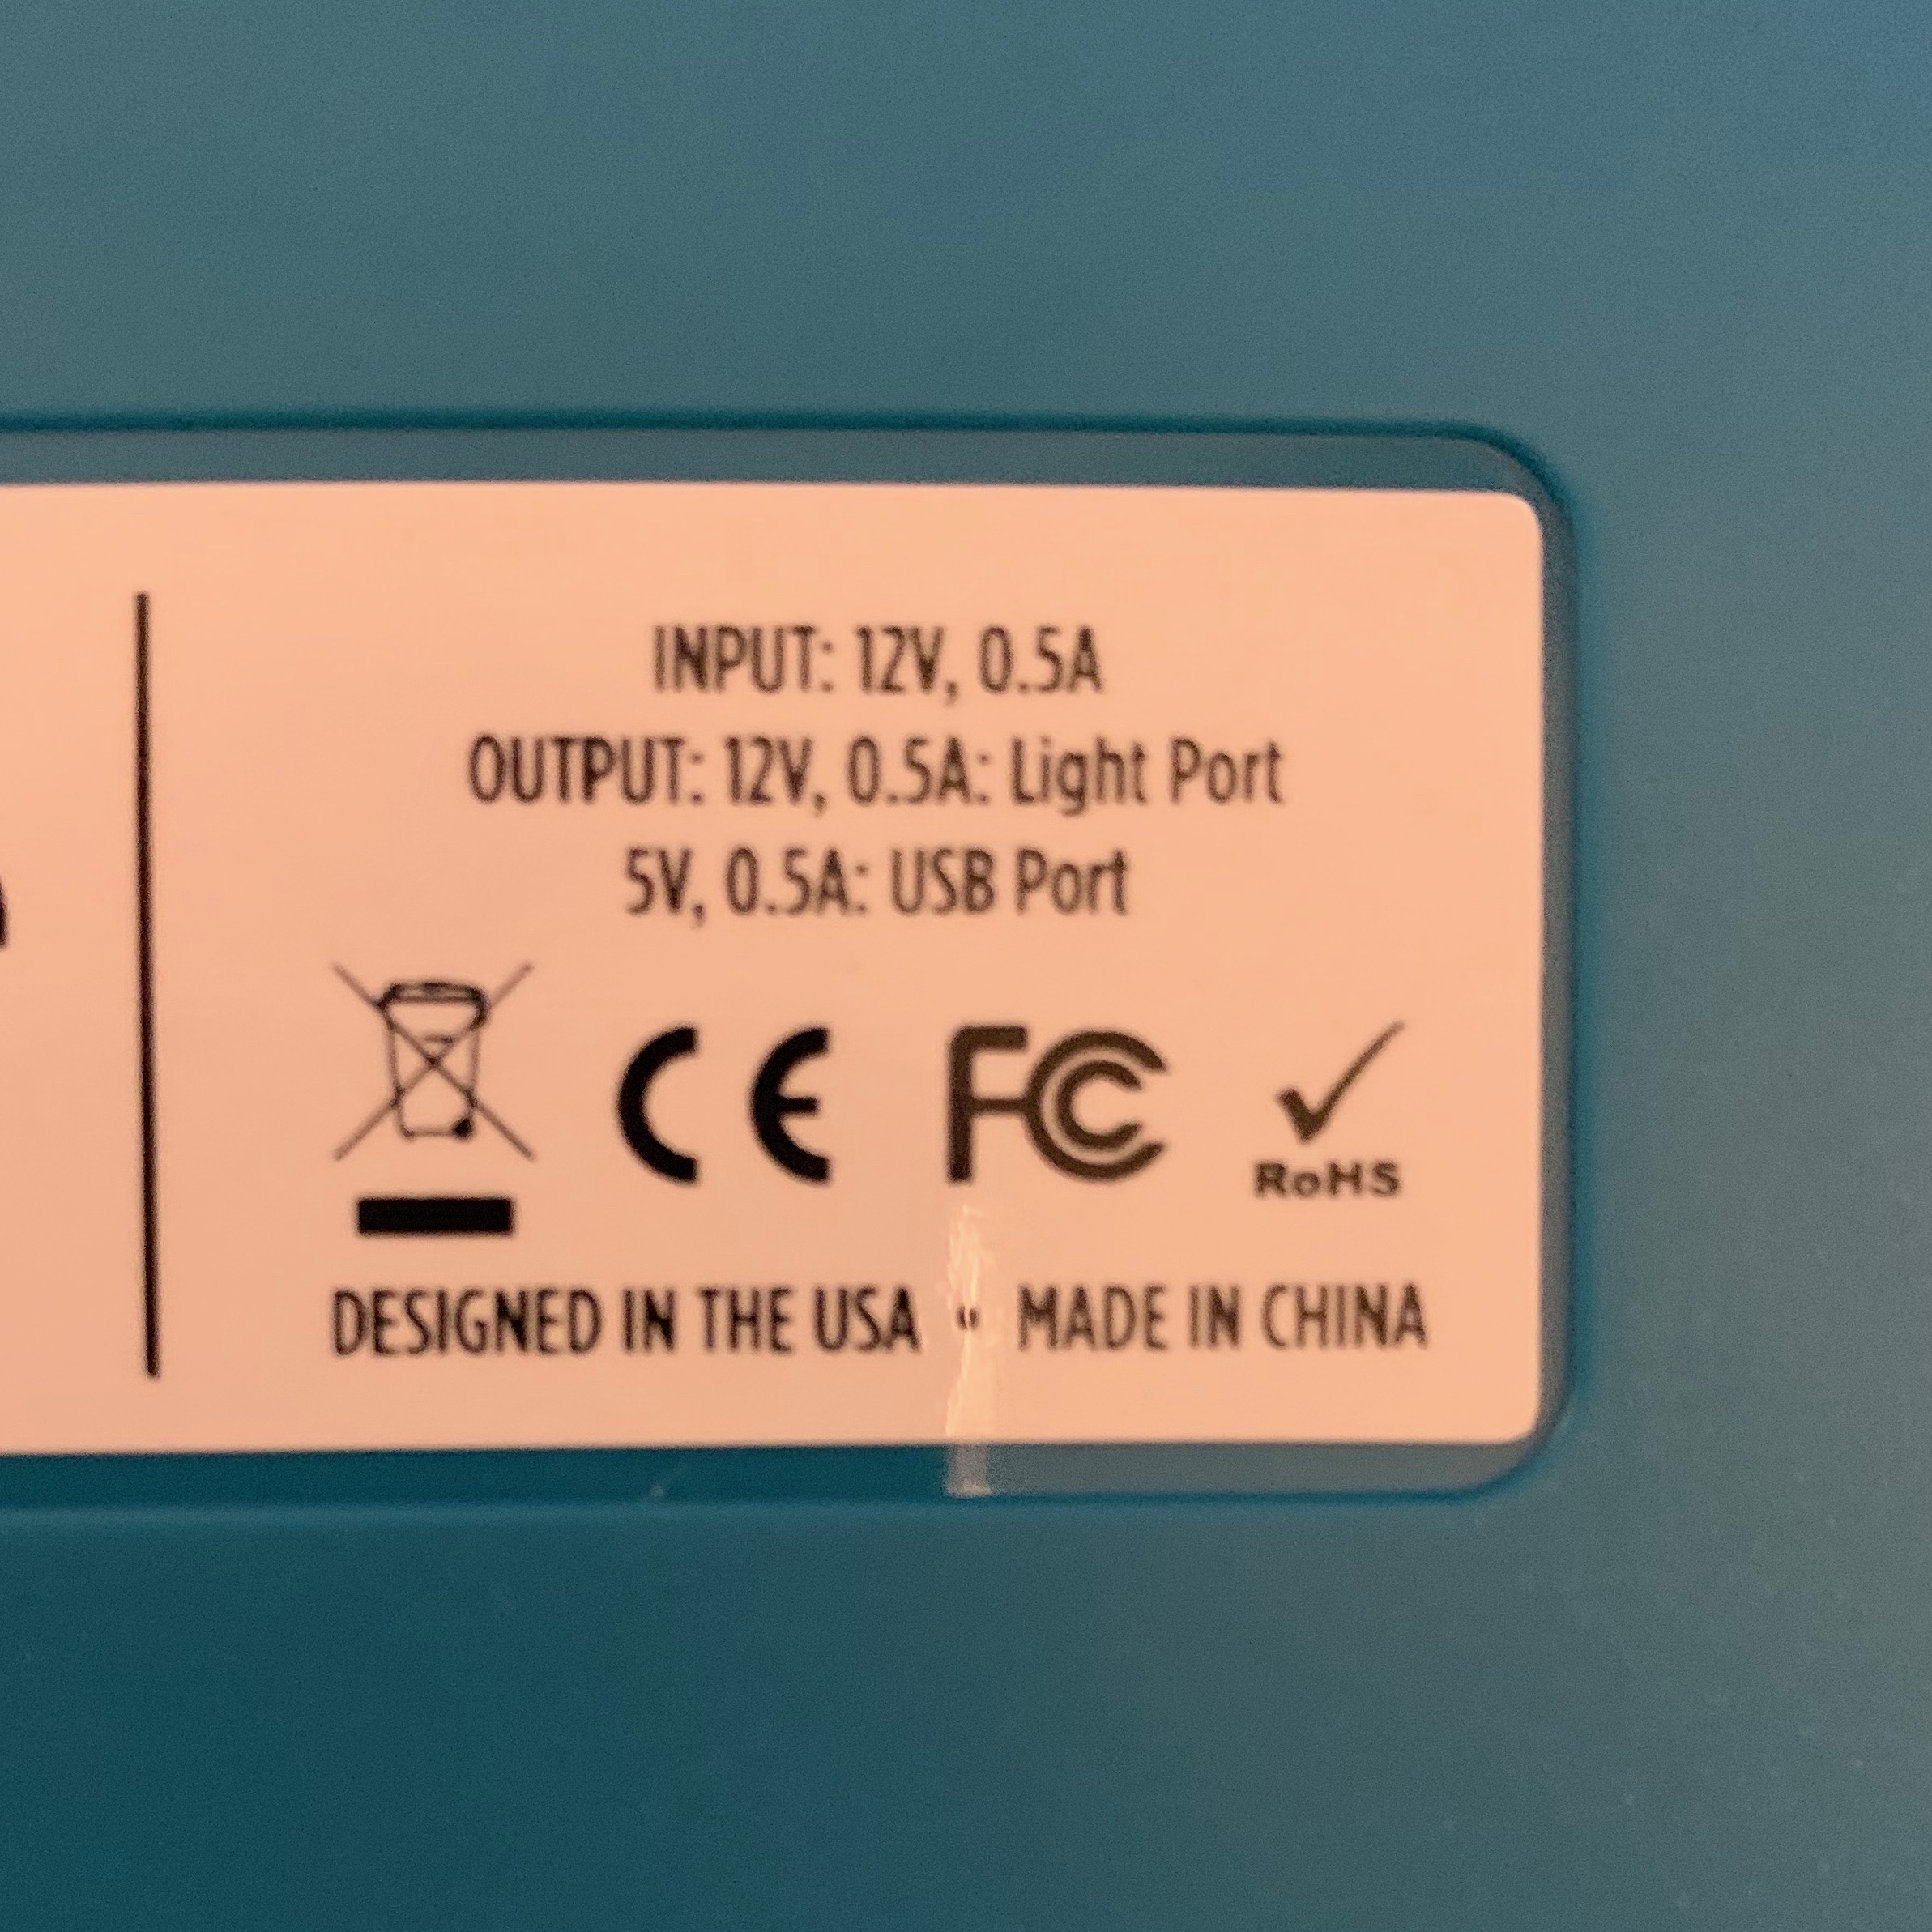 Controller specifications label